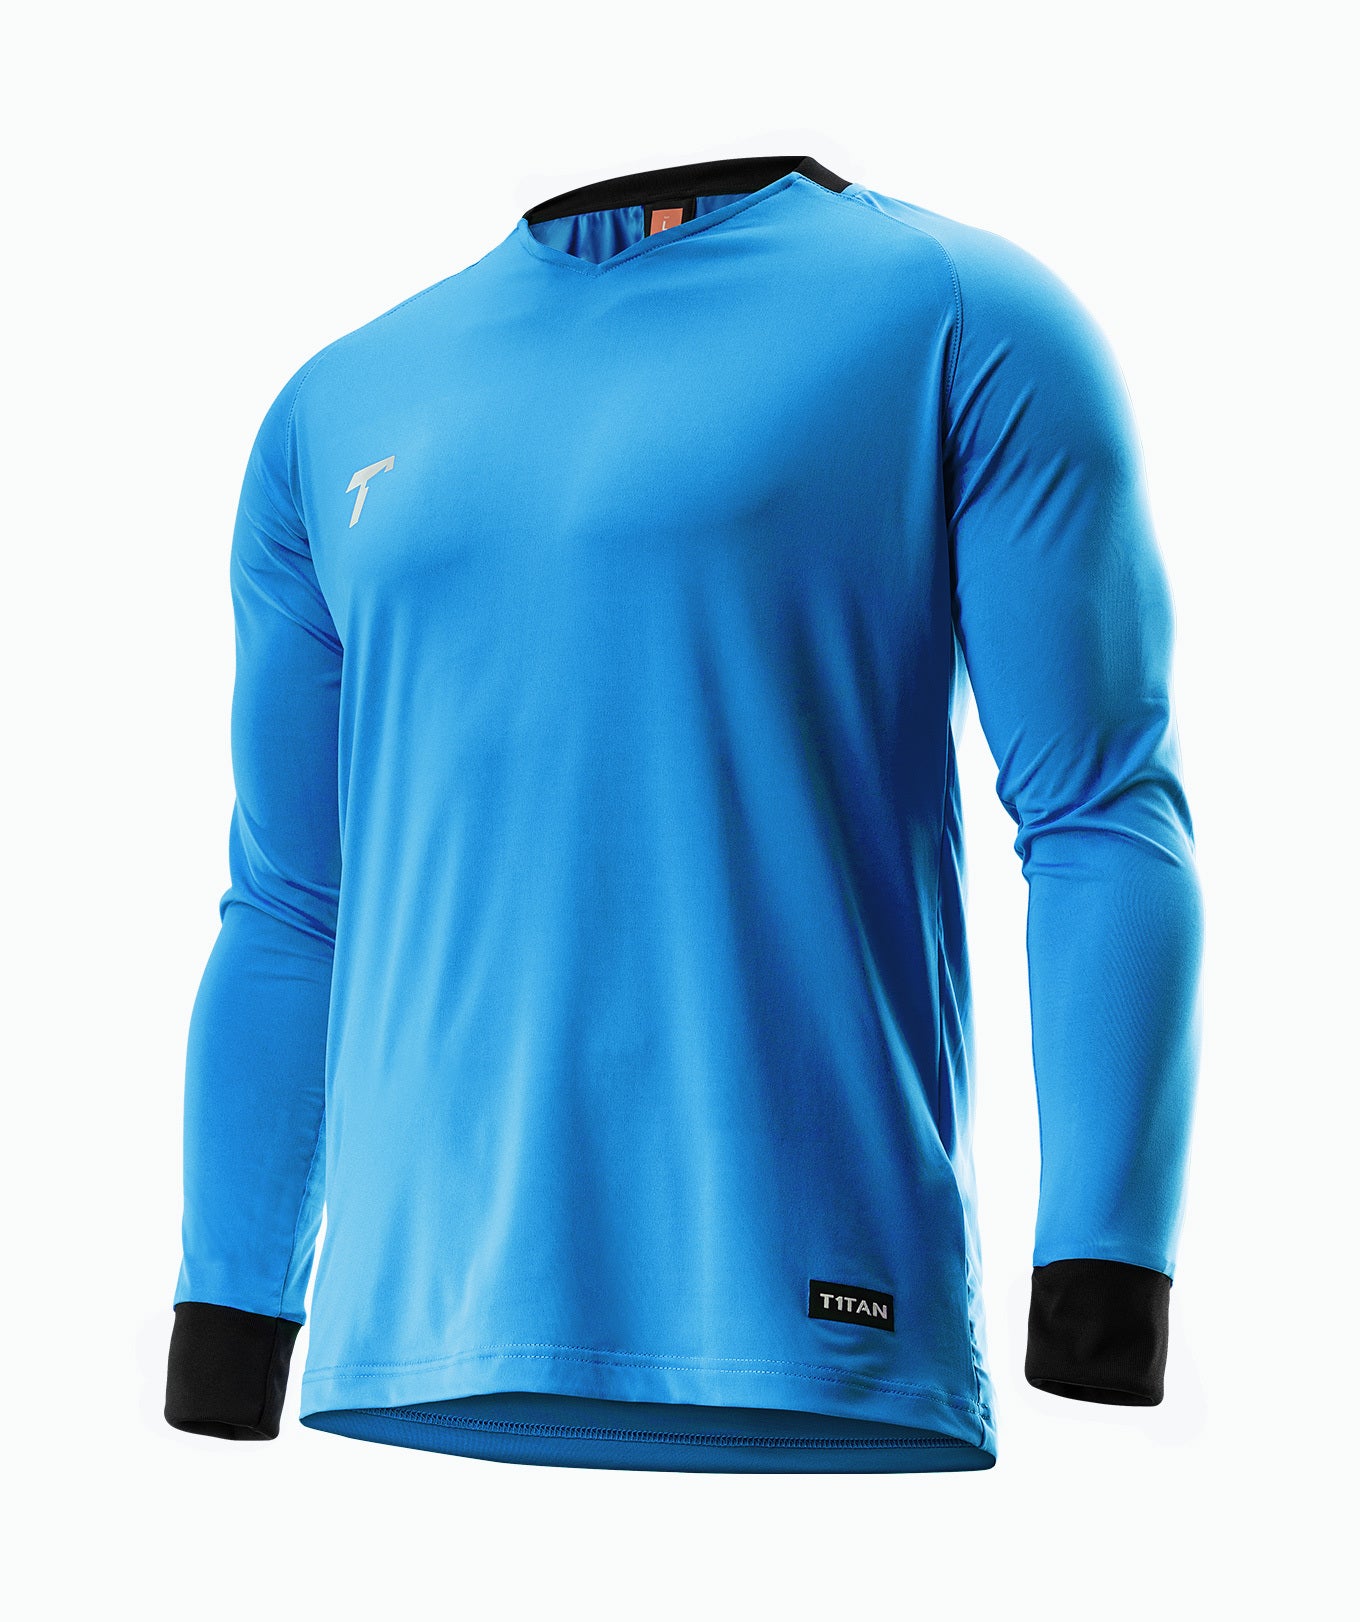 Germany Blank Blue Goalkeeper Soccer Country Jersey